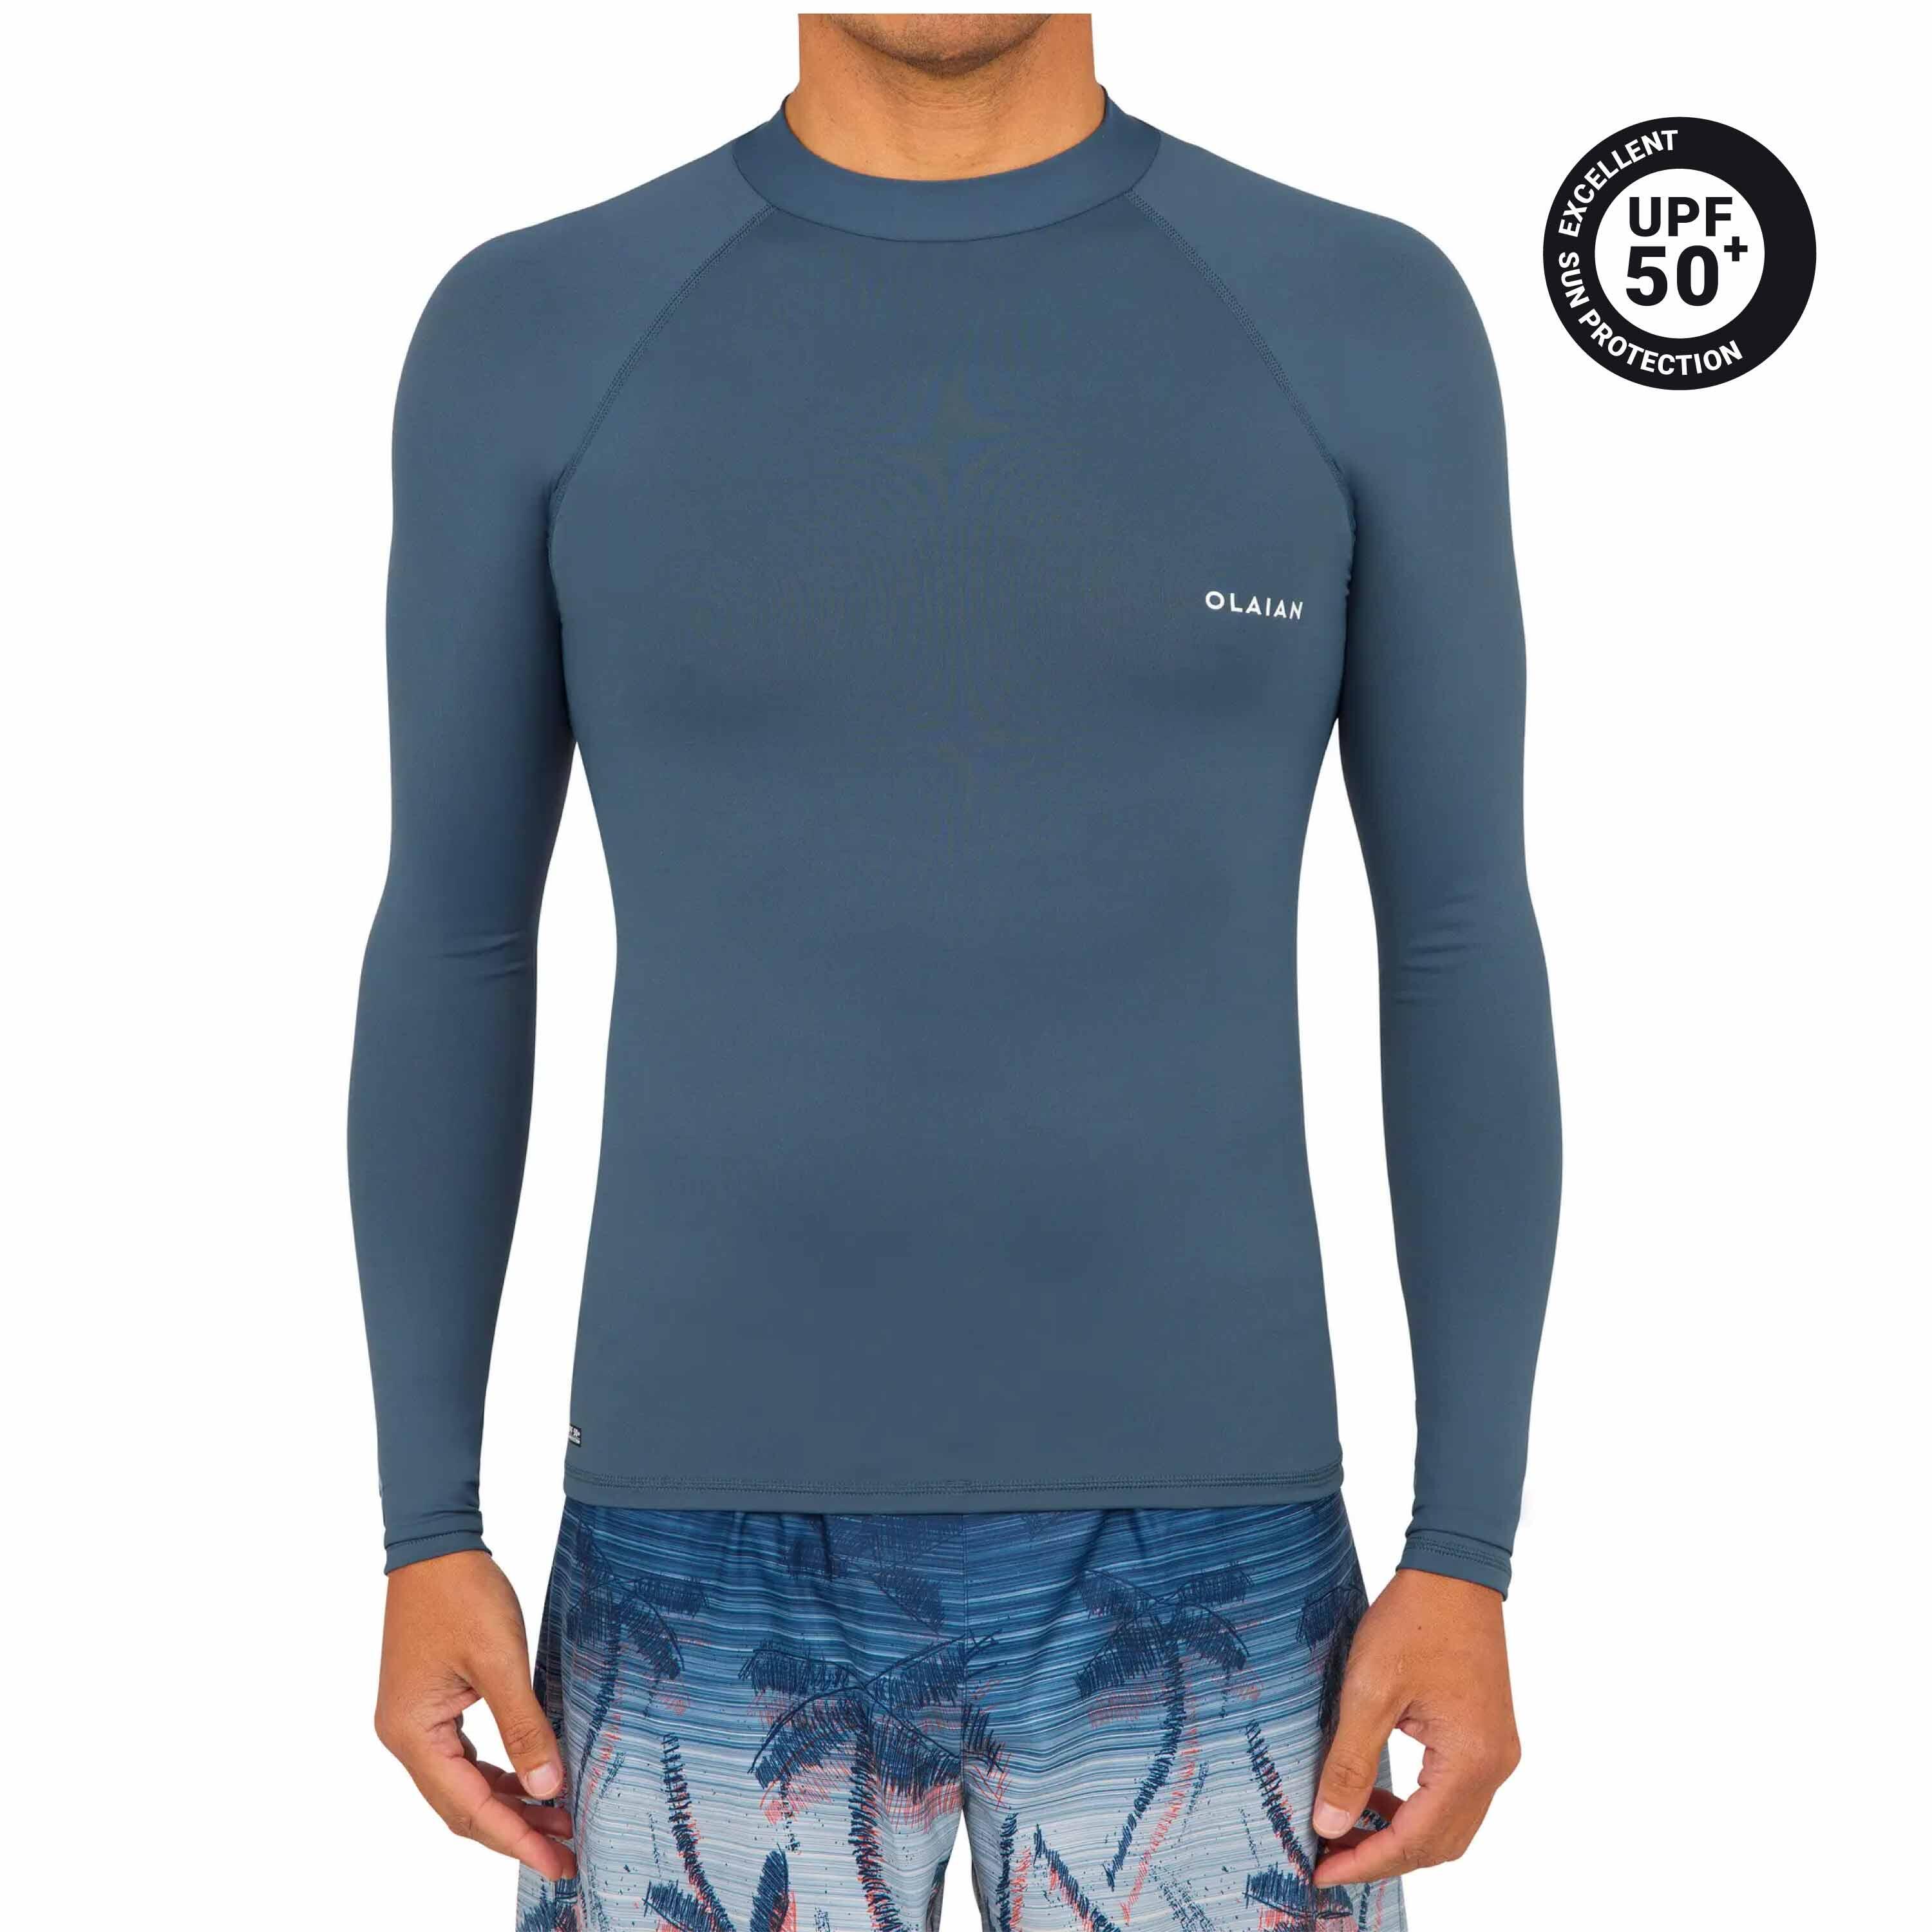 Men's surfing long-sleeved UV-protection top T-shirt 100 - grey 2/5